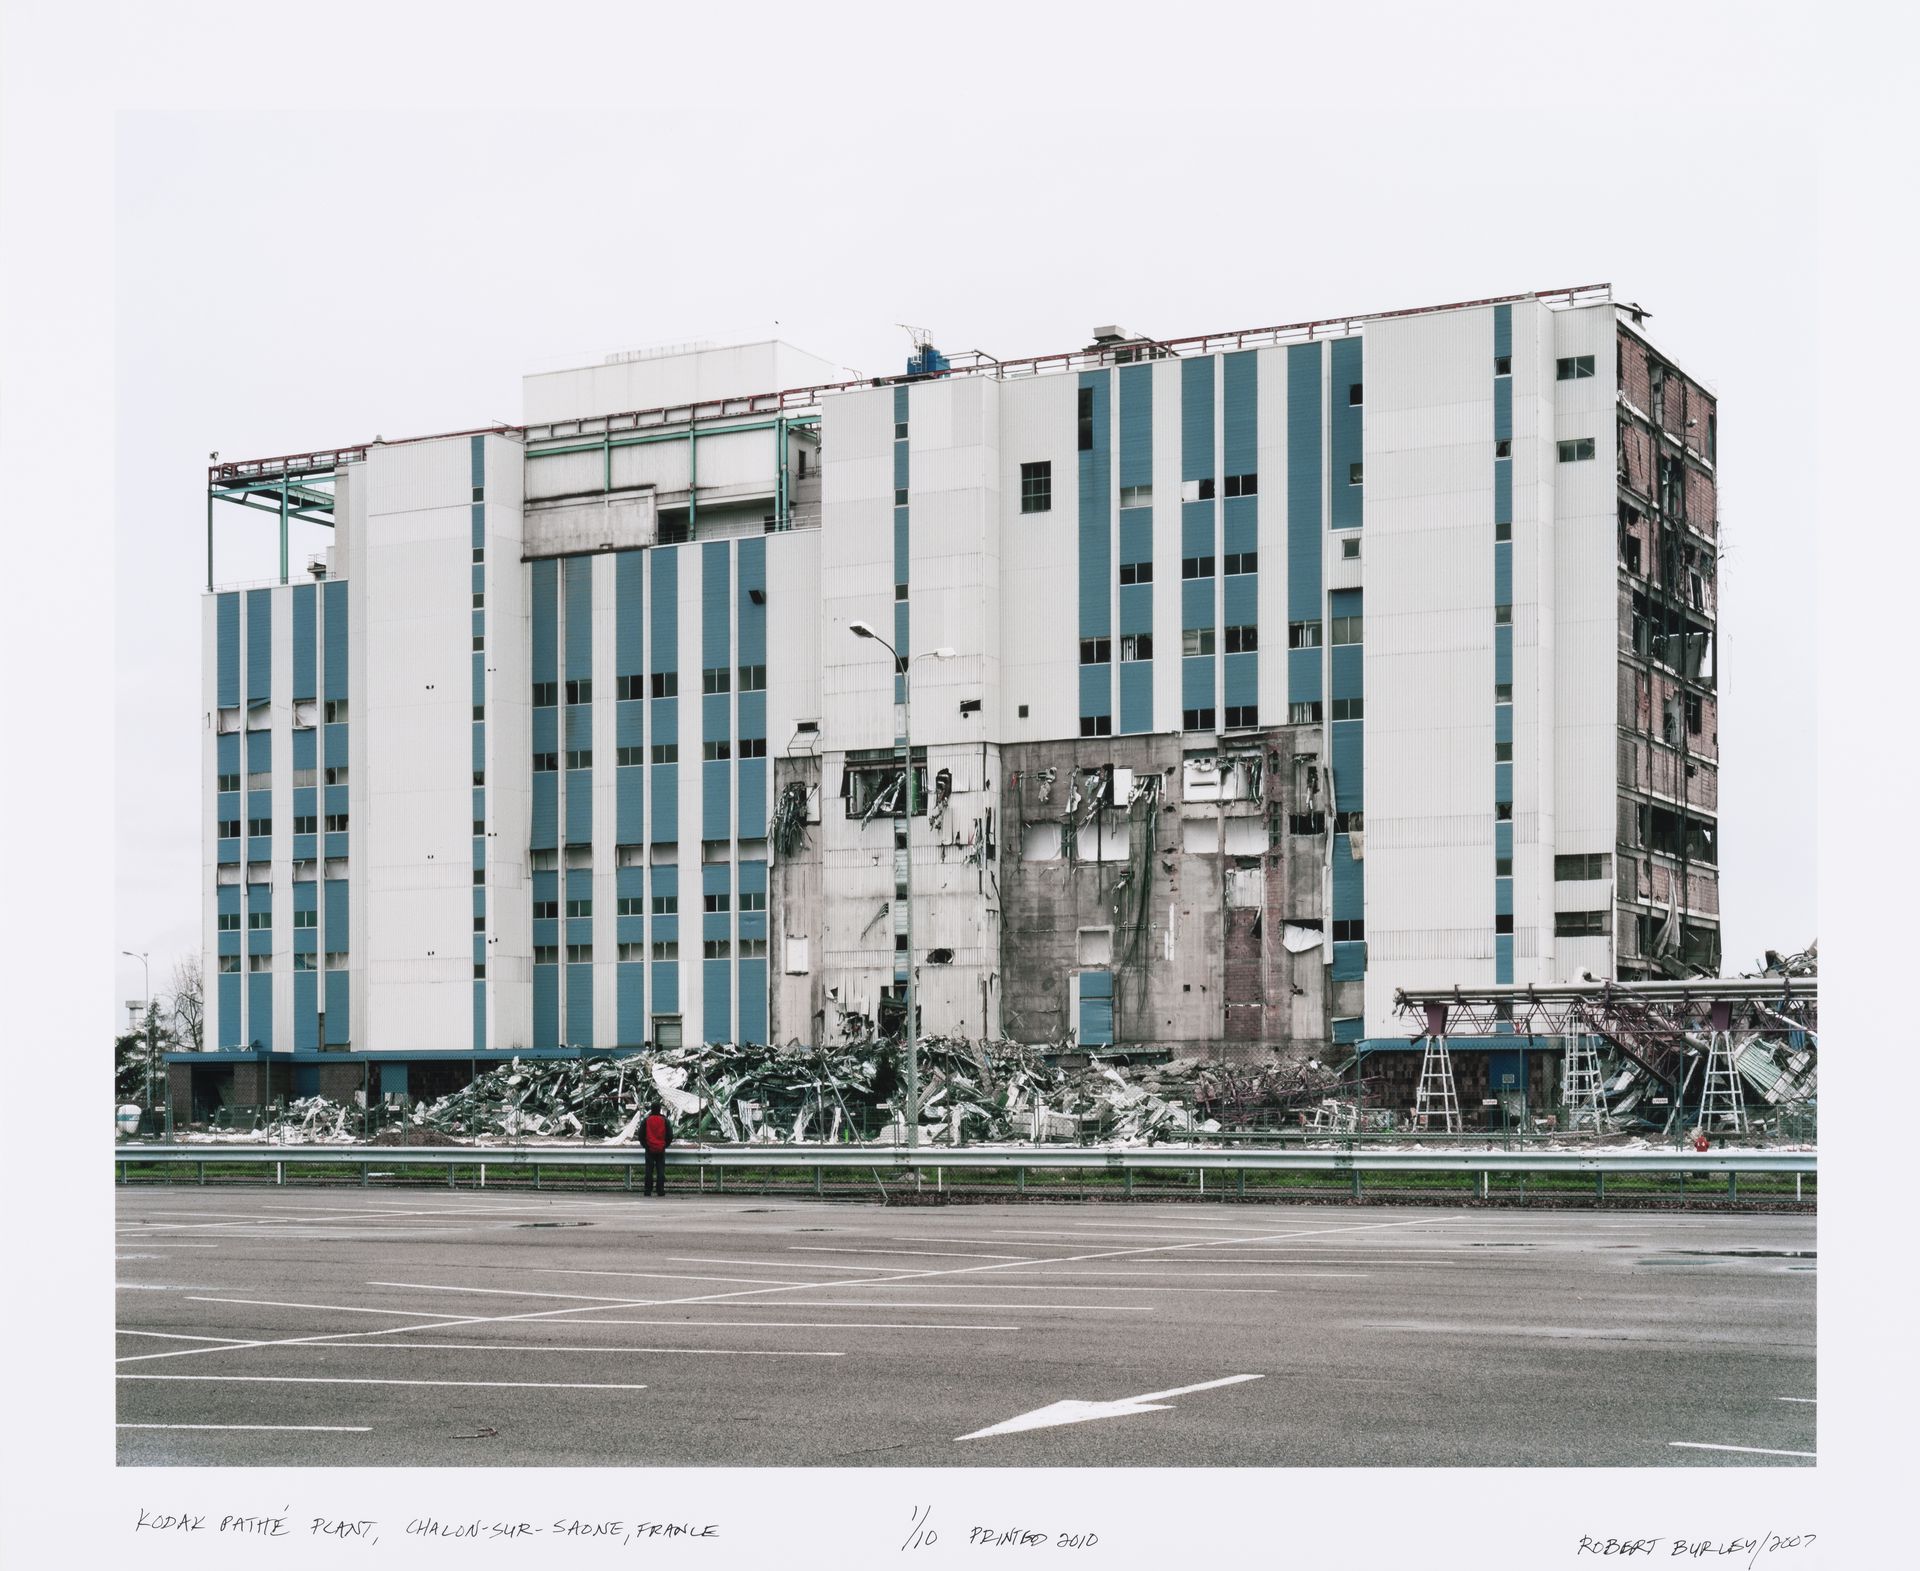 The Architecture of Photography in an Age of Obsolescence